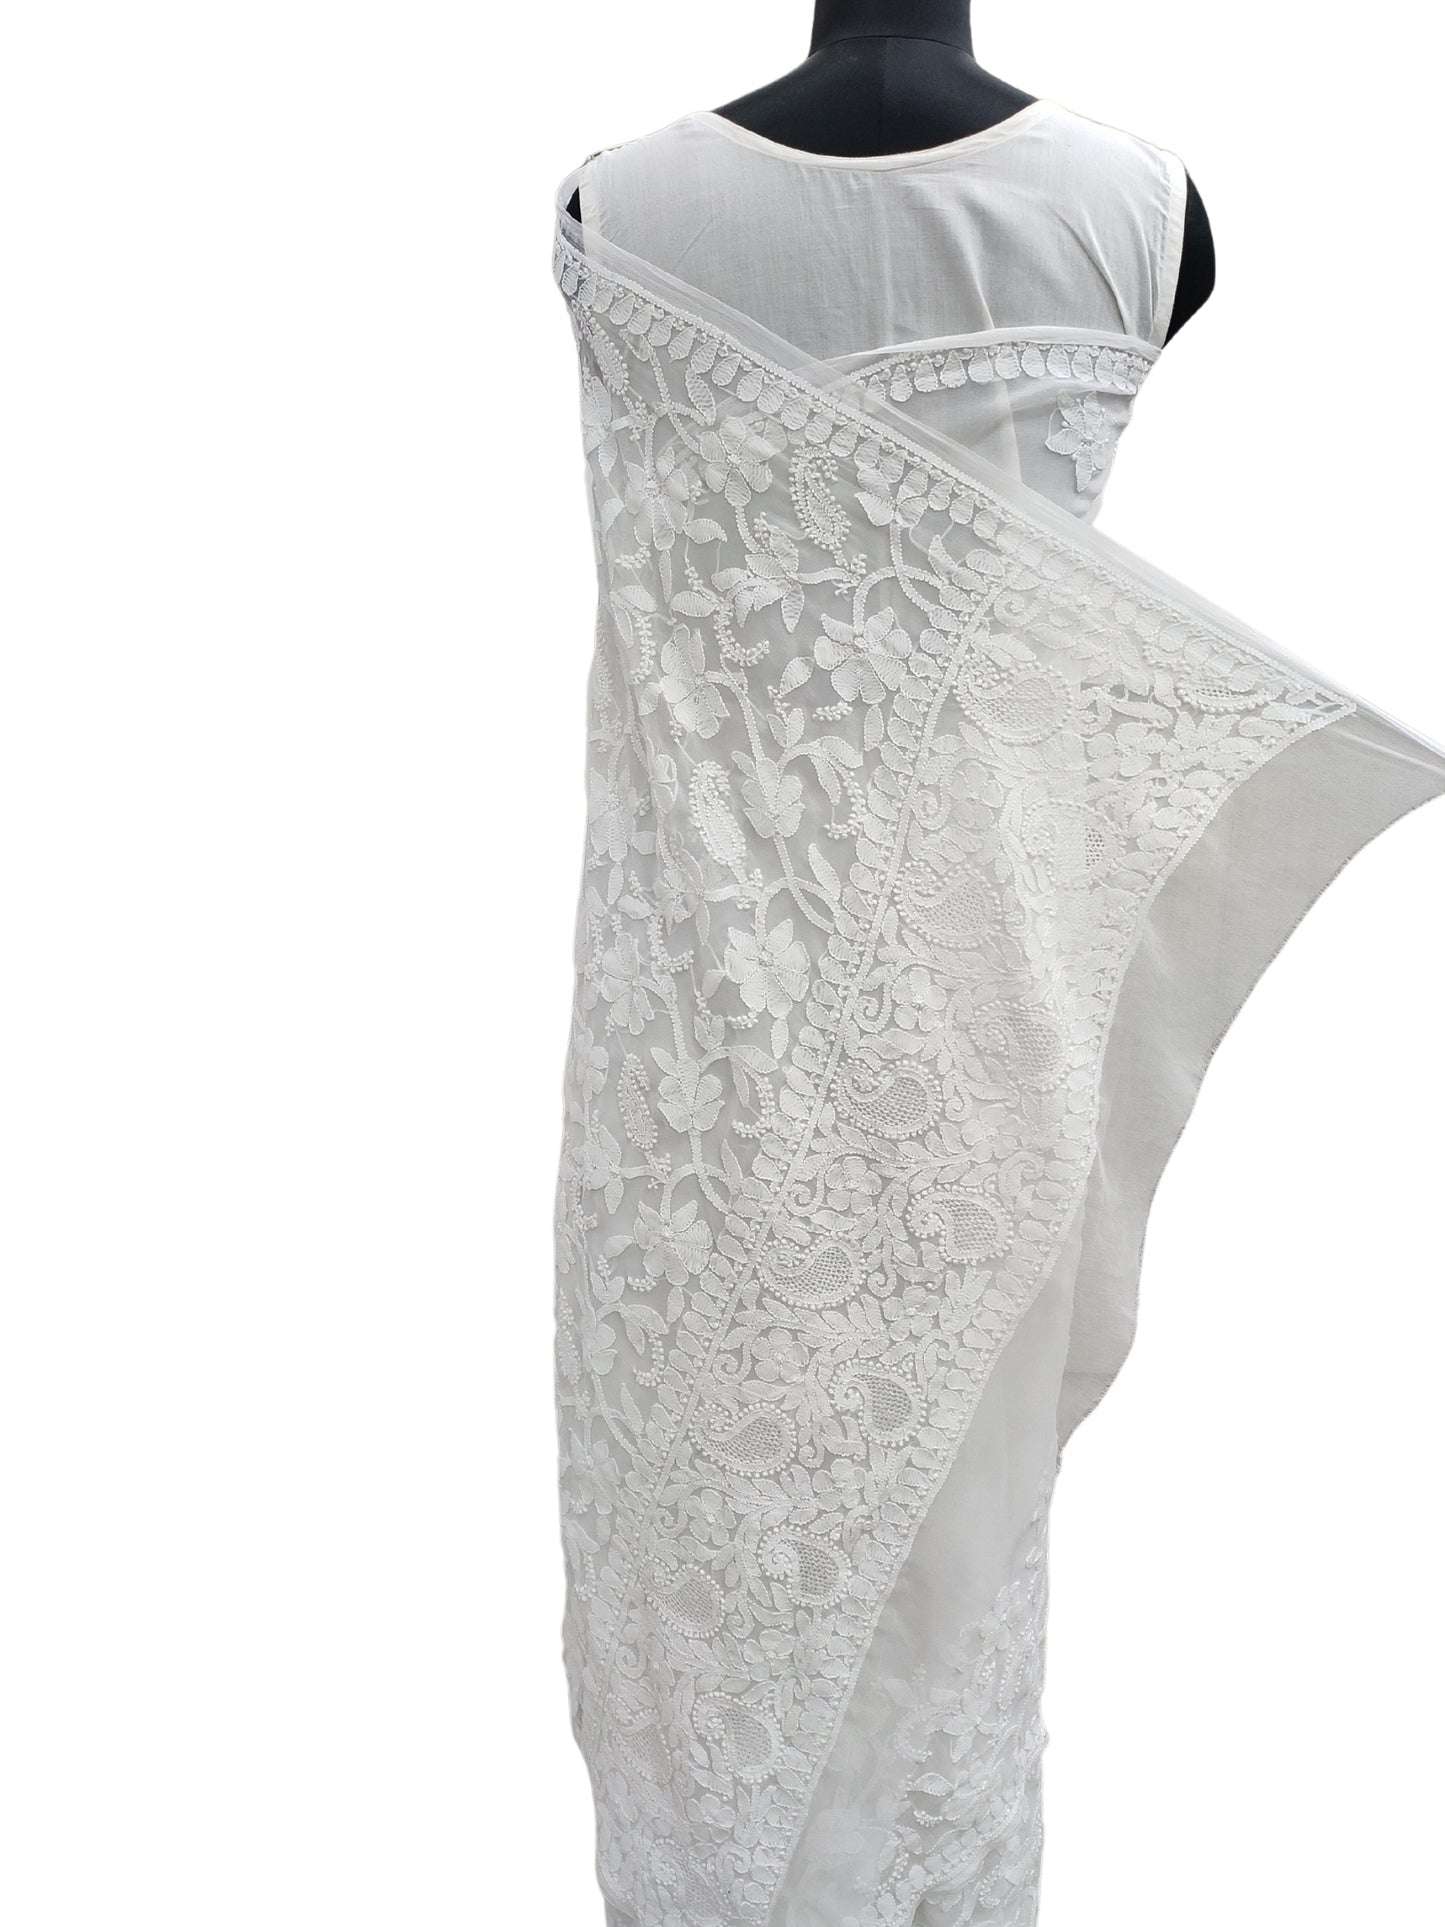 Shyamal Chikan Hand Embroidered White Georgette Lucknowi Chikankari Skirt Saree With Blouse Piece - S6522